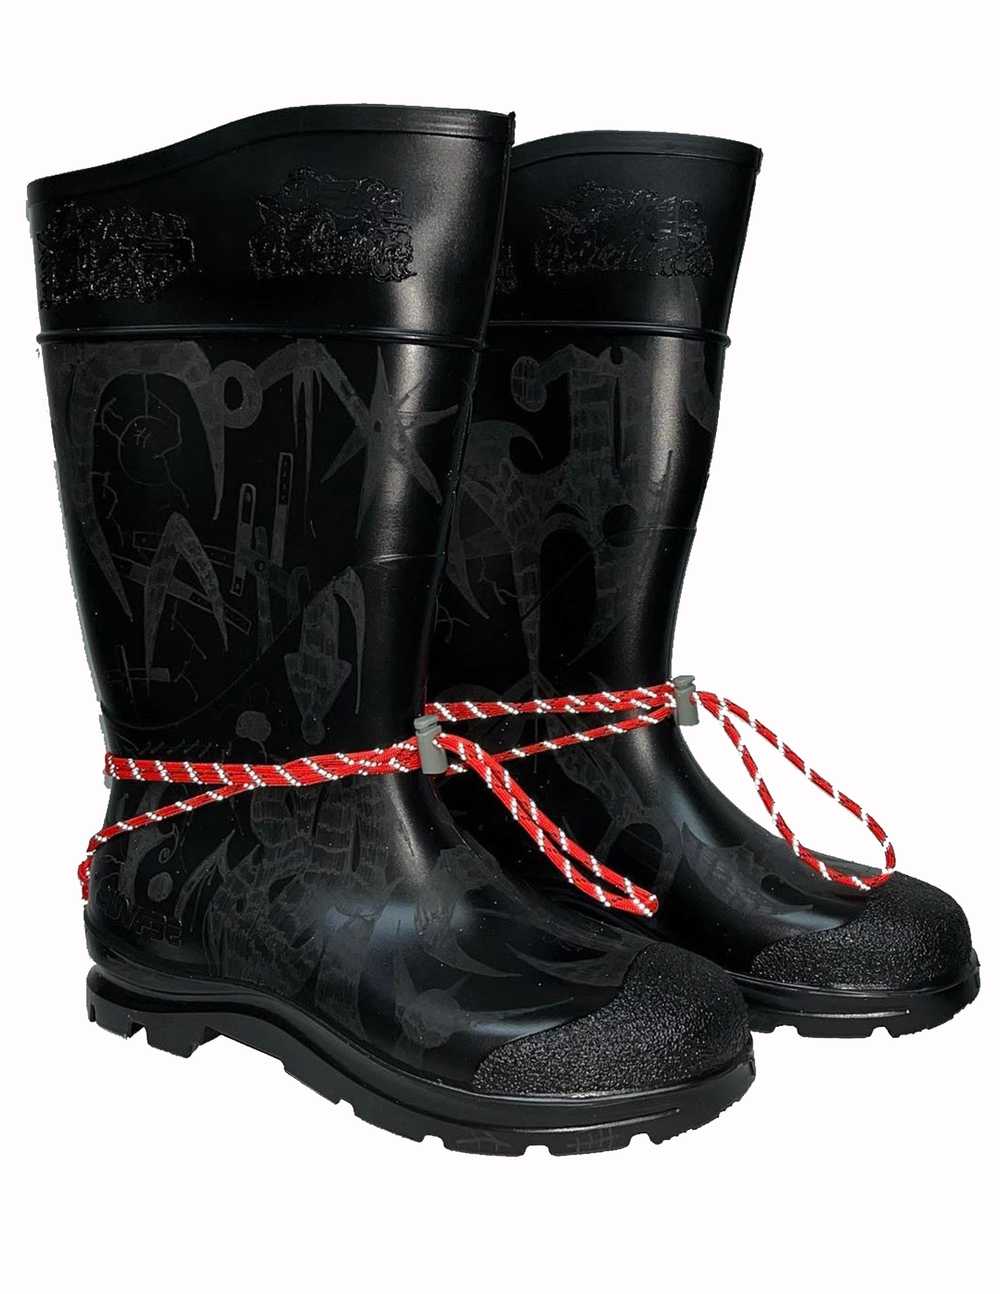 OrderByDisorder 1/1 Engraved Rubber Boots - image 1